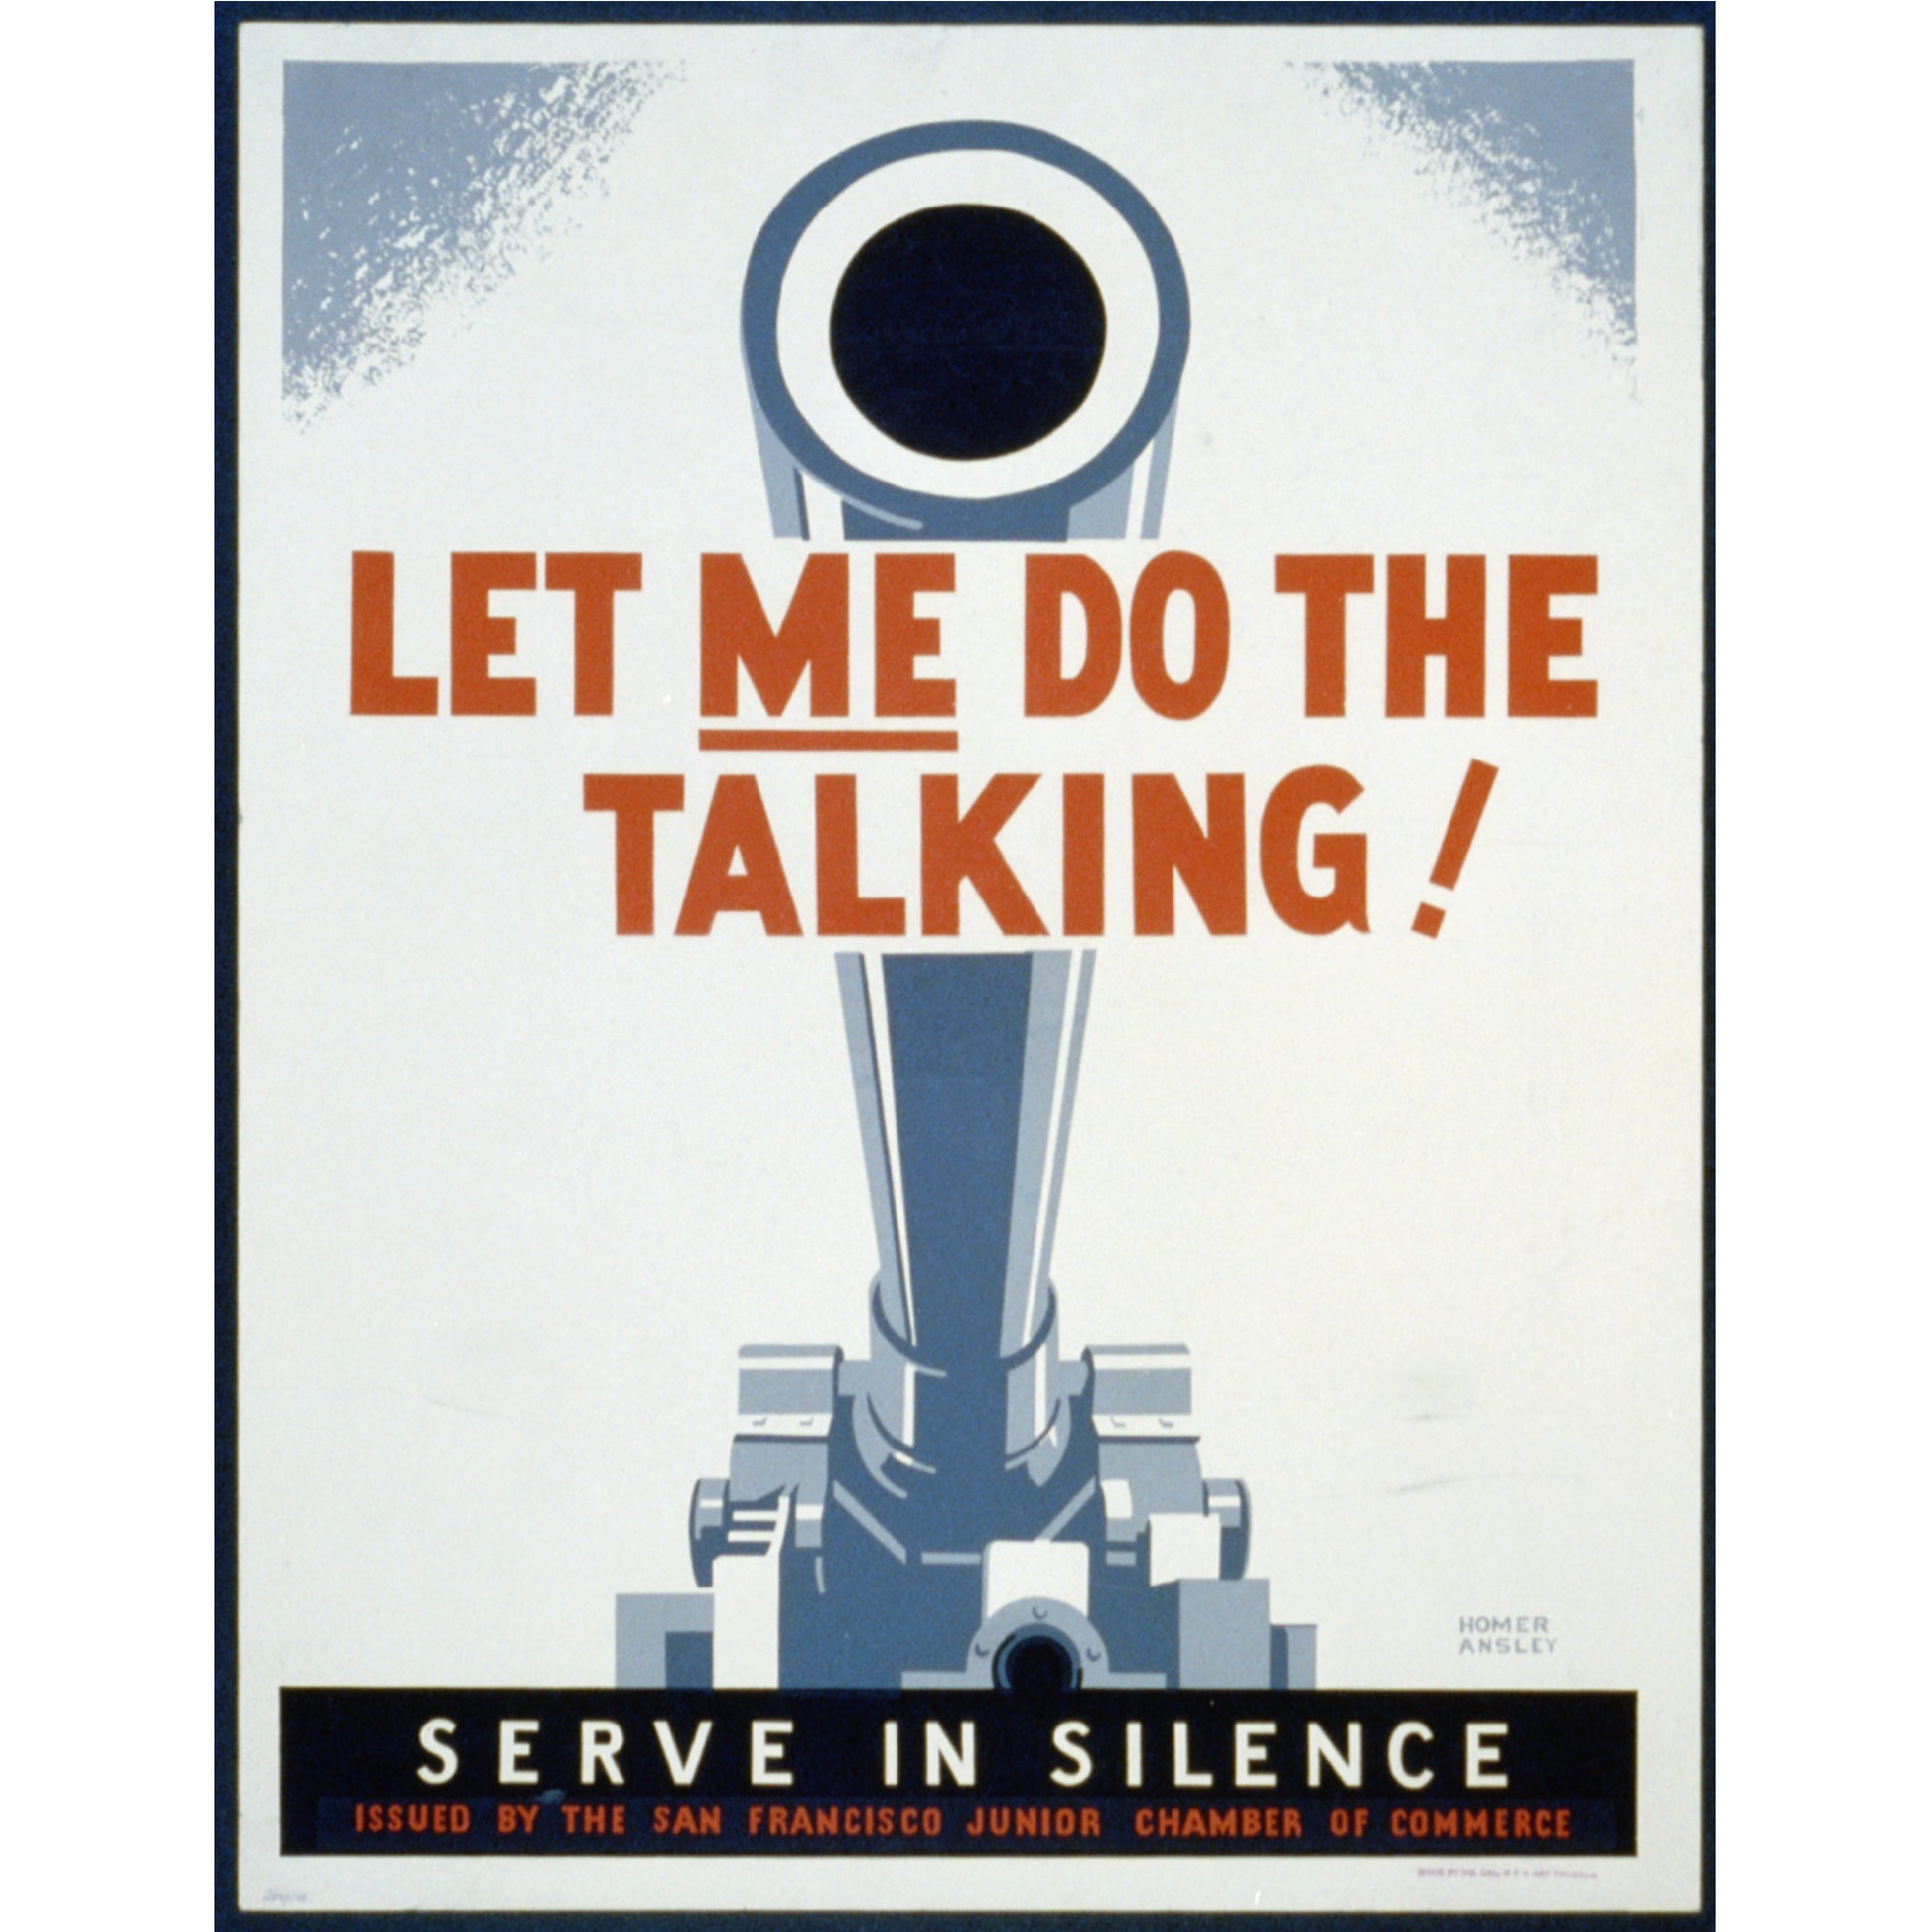 POSTERS OF THE WPA by Christoper Denoon 1987